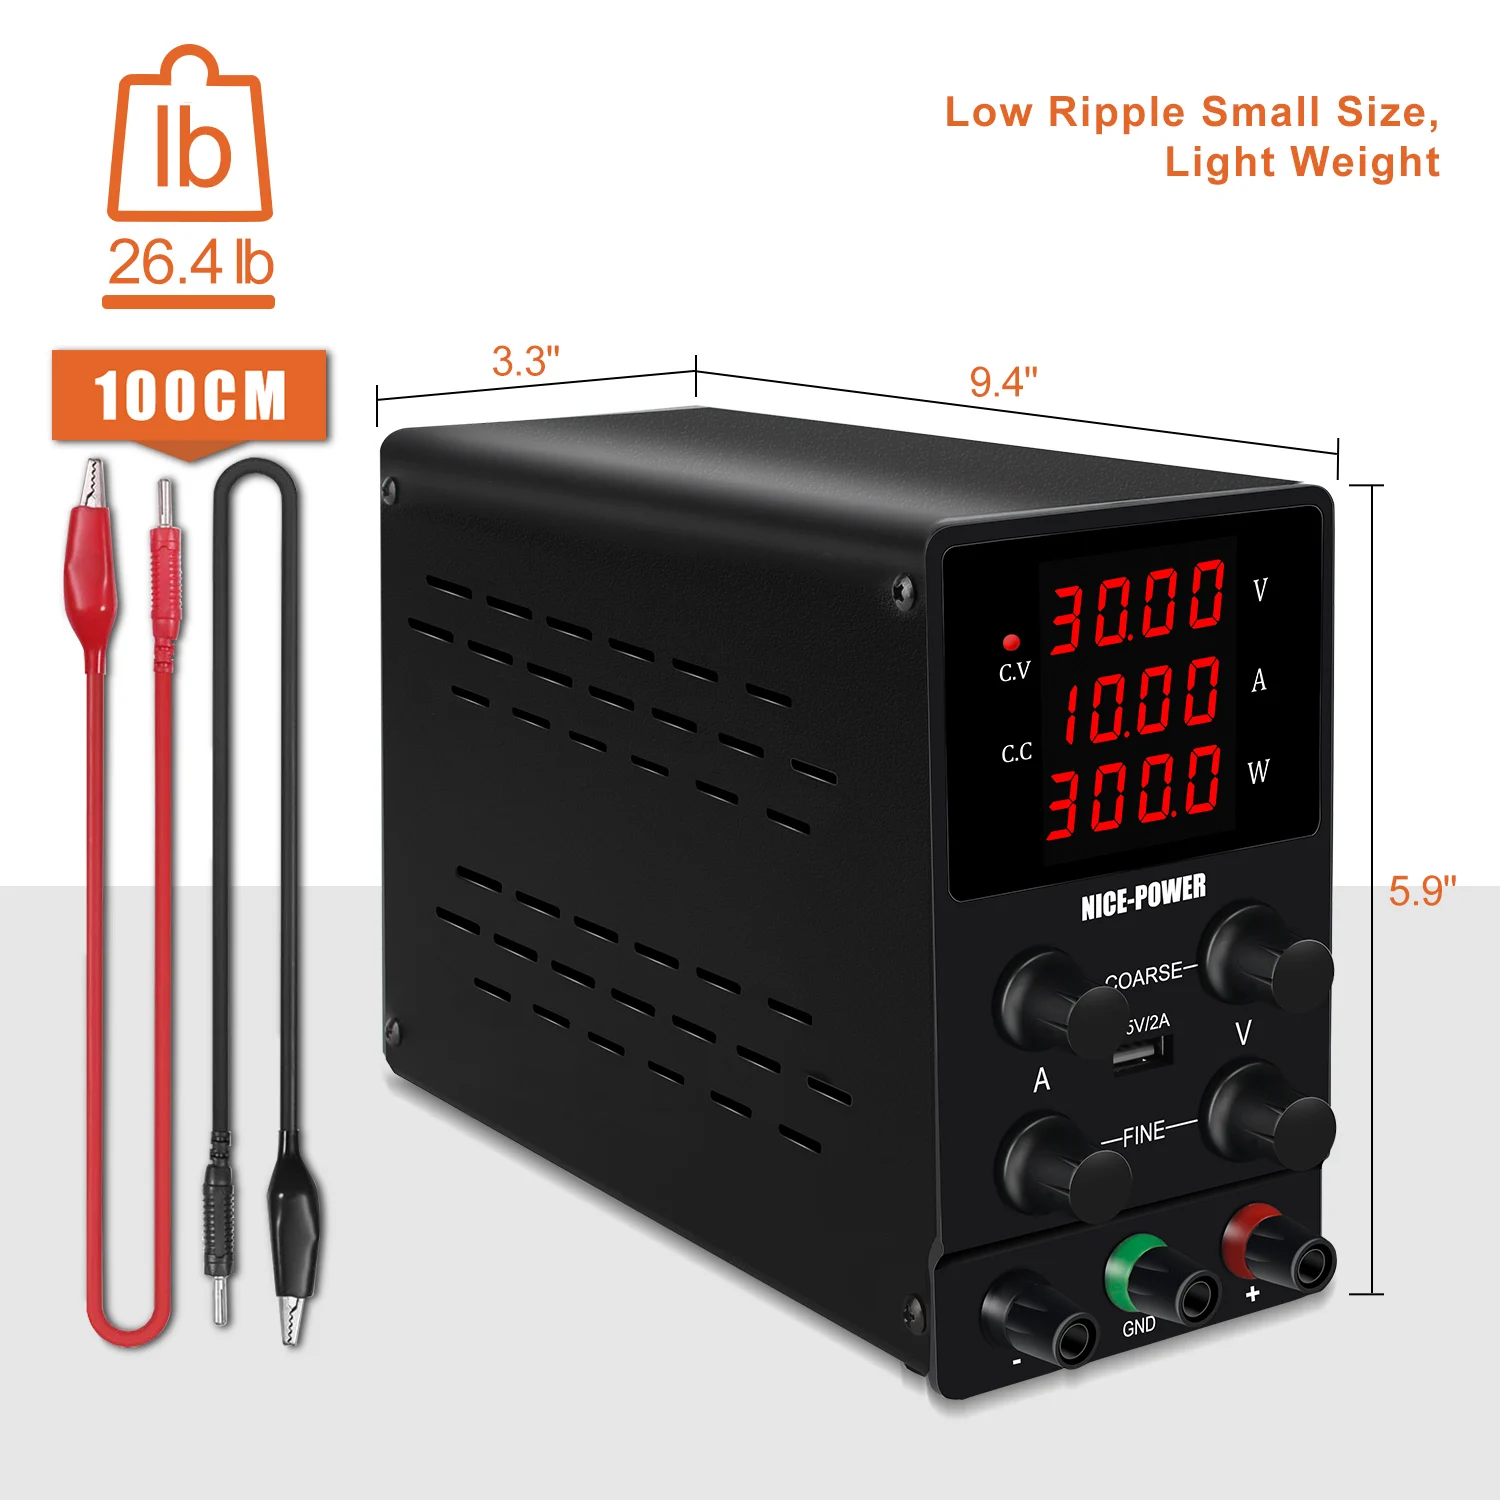 NICE-POWER SPS3010 4 Digital USB 5V 2A, 30V 10A Adjustable Switching Power  Supply at best price in Chennai